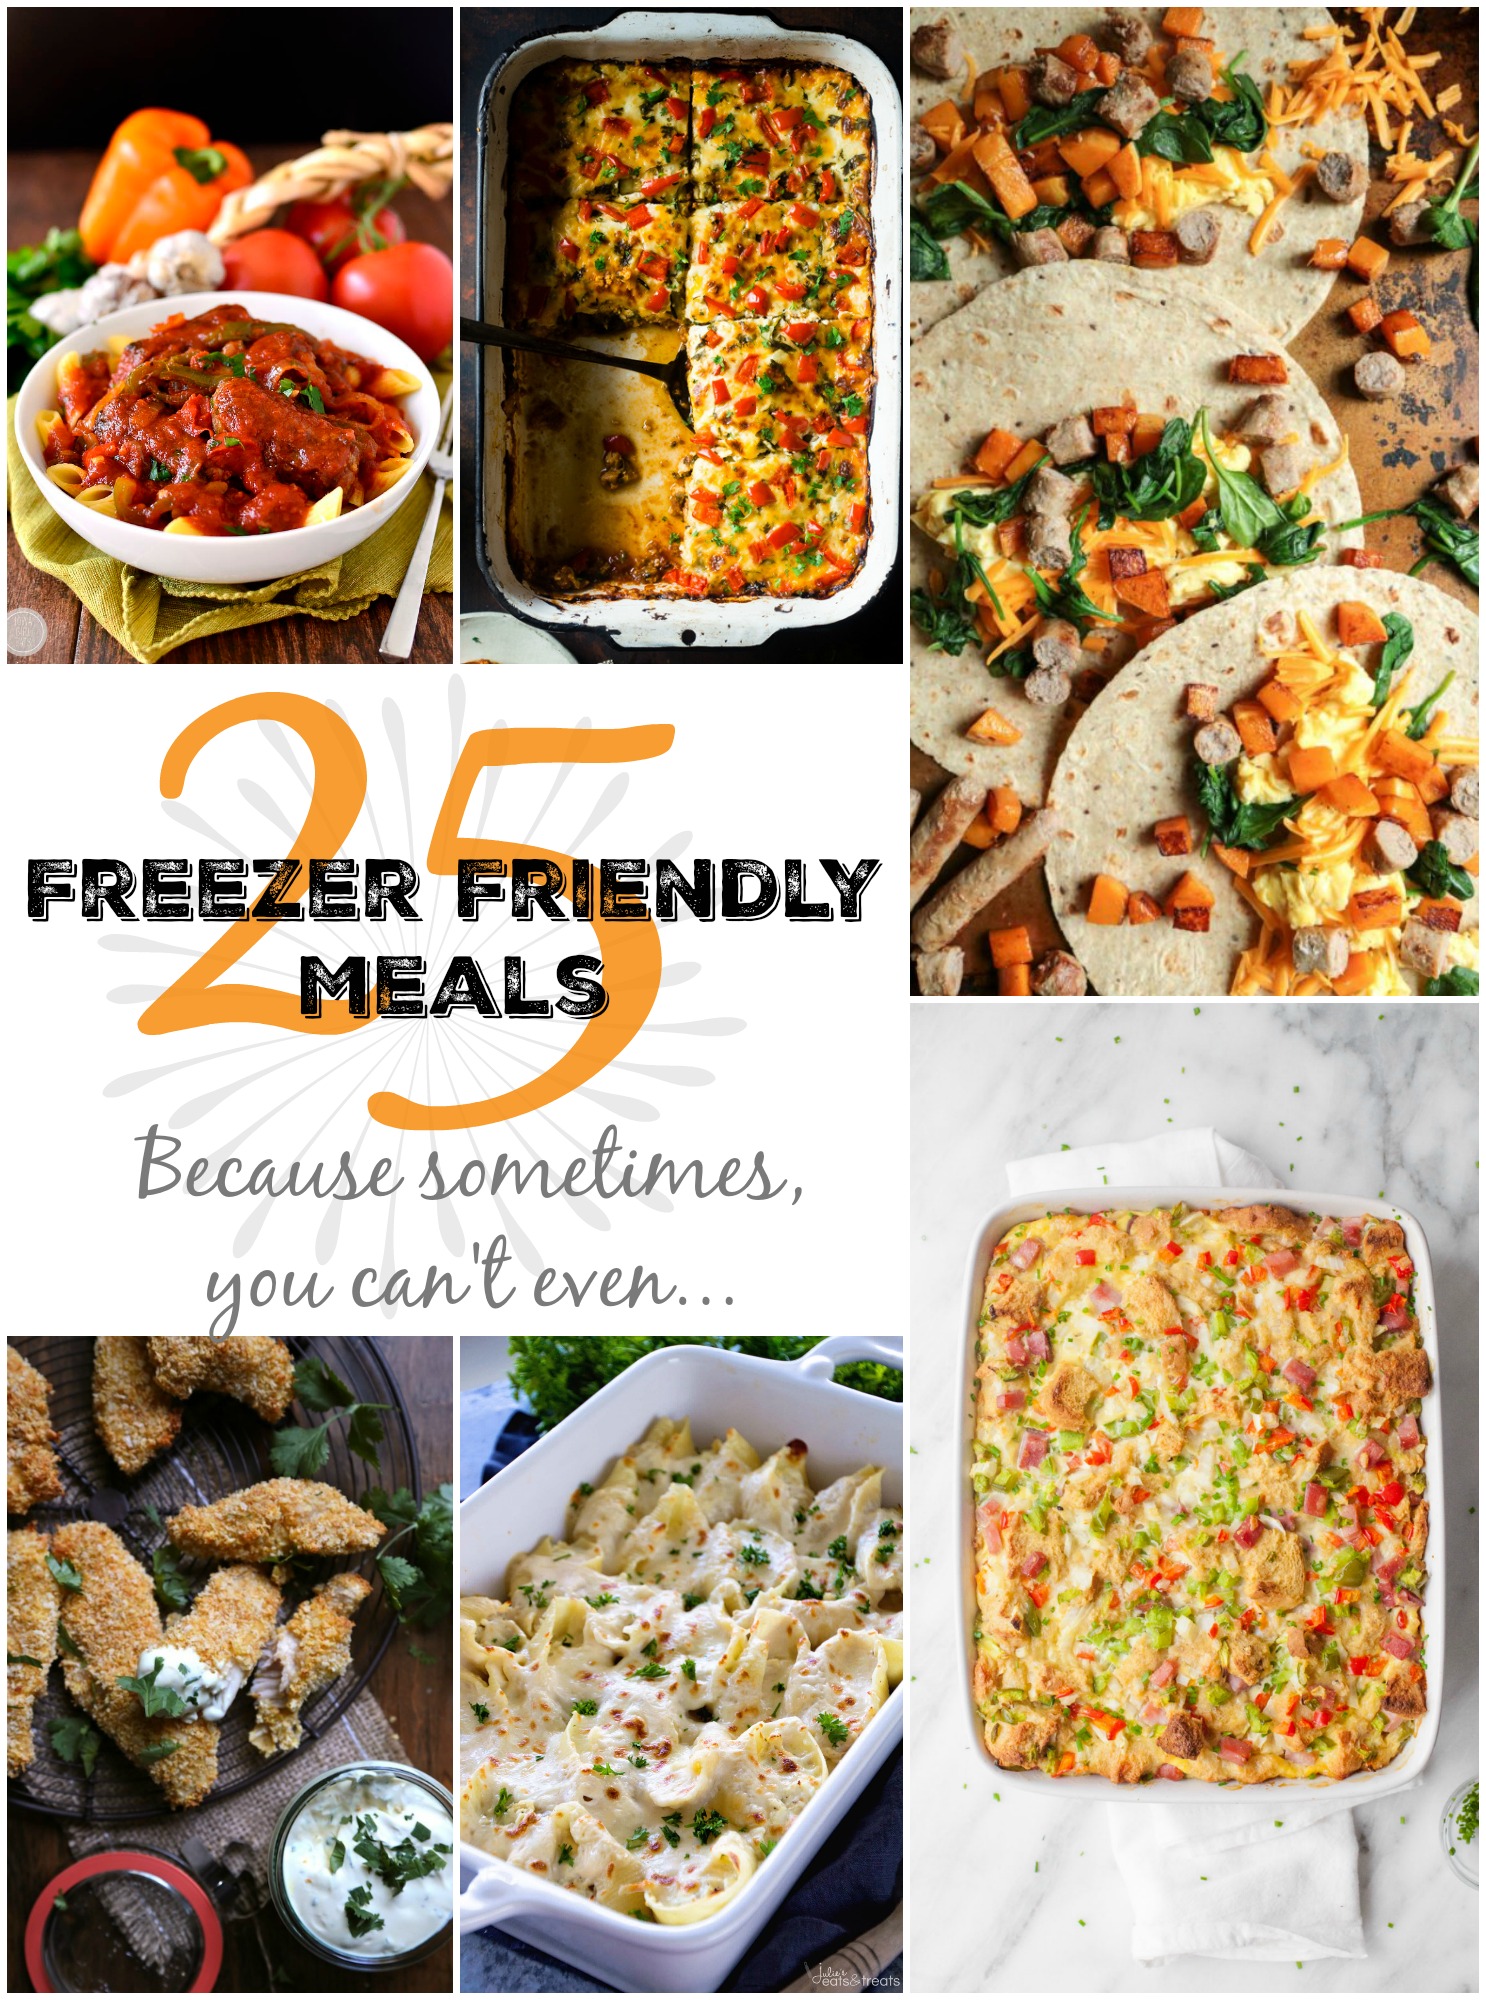 25 Freezer Friendly Meals - Because sometimes you just can't even